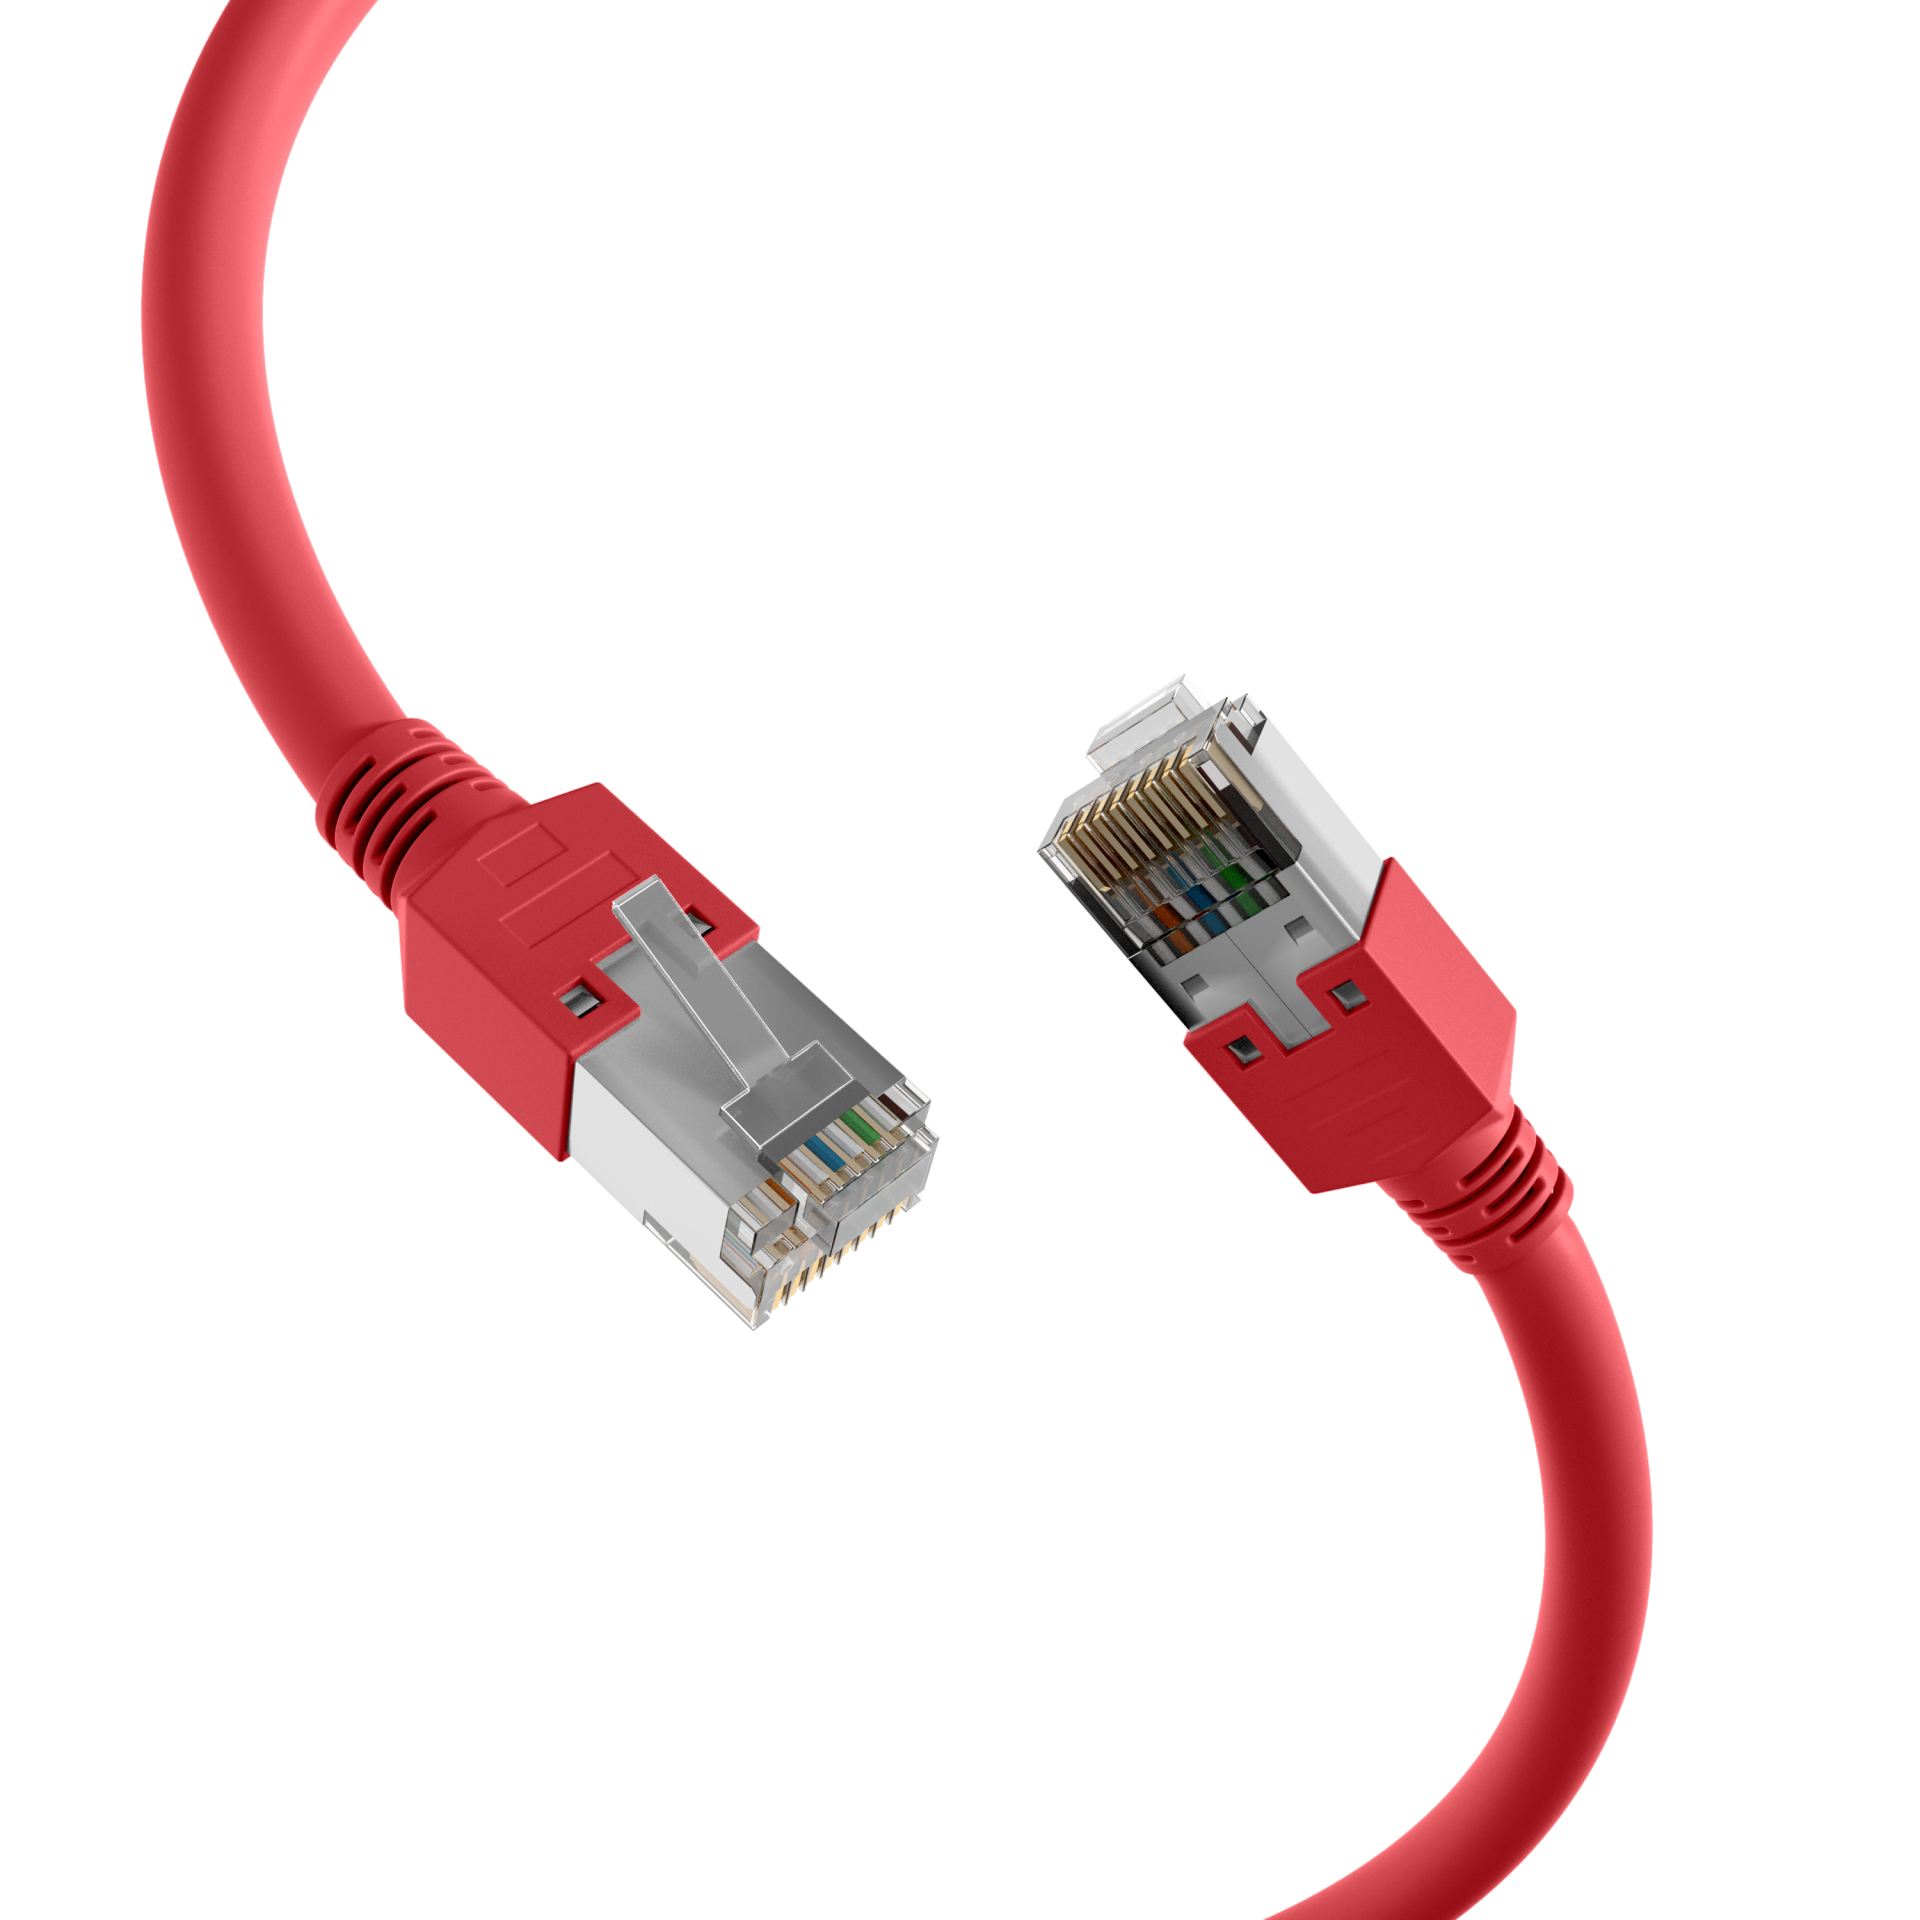 RJ45 Patch Cord Cat.5e S/UTP PVCDätwyler 5502 TM11 red 3m